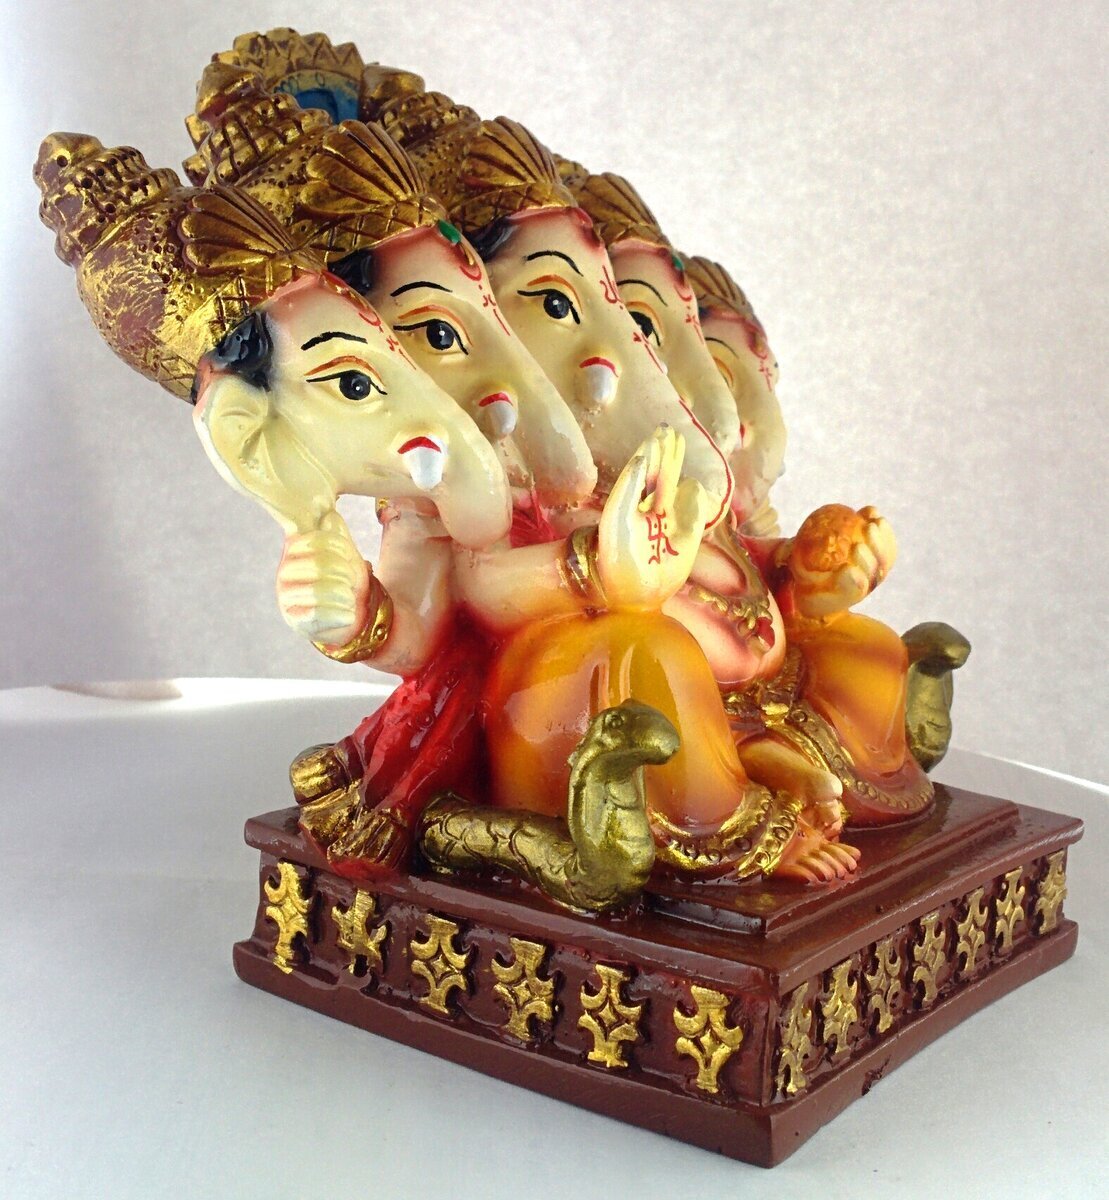 Buy Saugat Traders Lord Ganesh Statue for Home Temple - Marble Ganesh Ji  Murti - Ganesh Idol for Housewarming - Good Luck - Diwali Gift Online at  Low Prices in India - Amazon.in